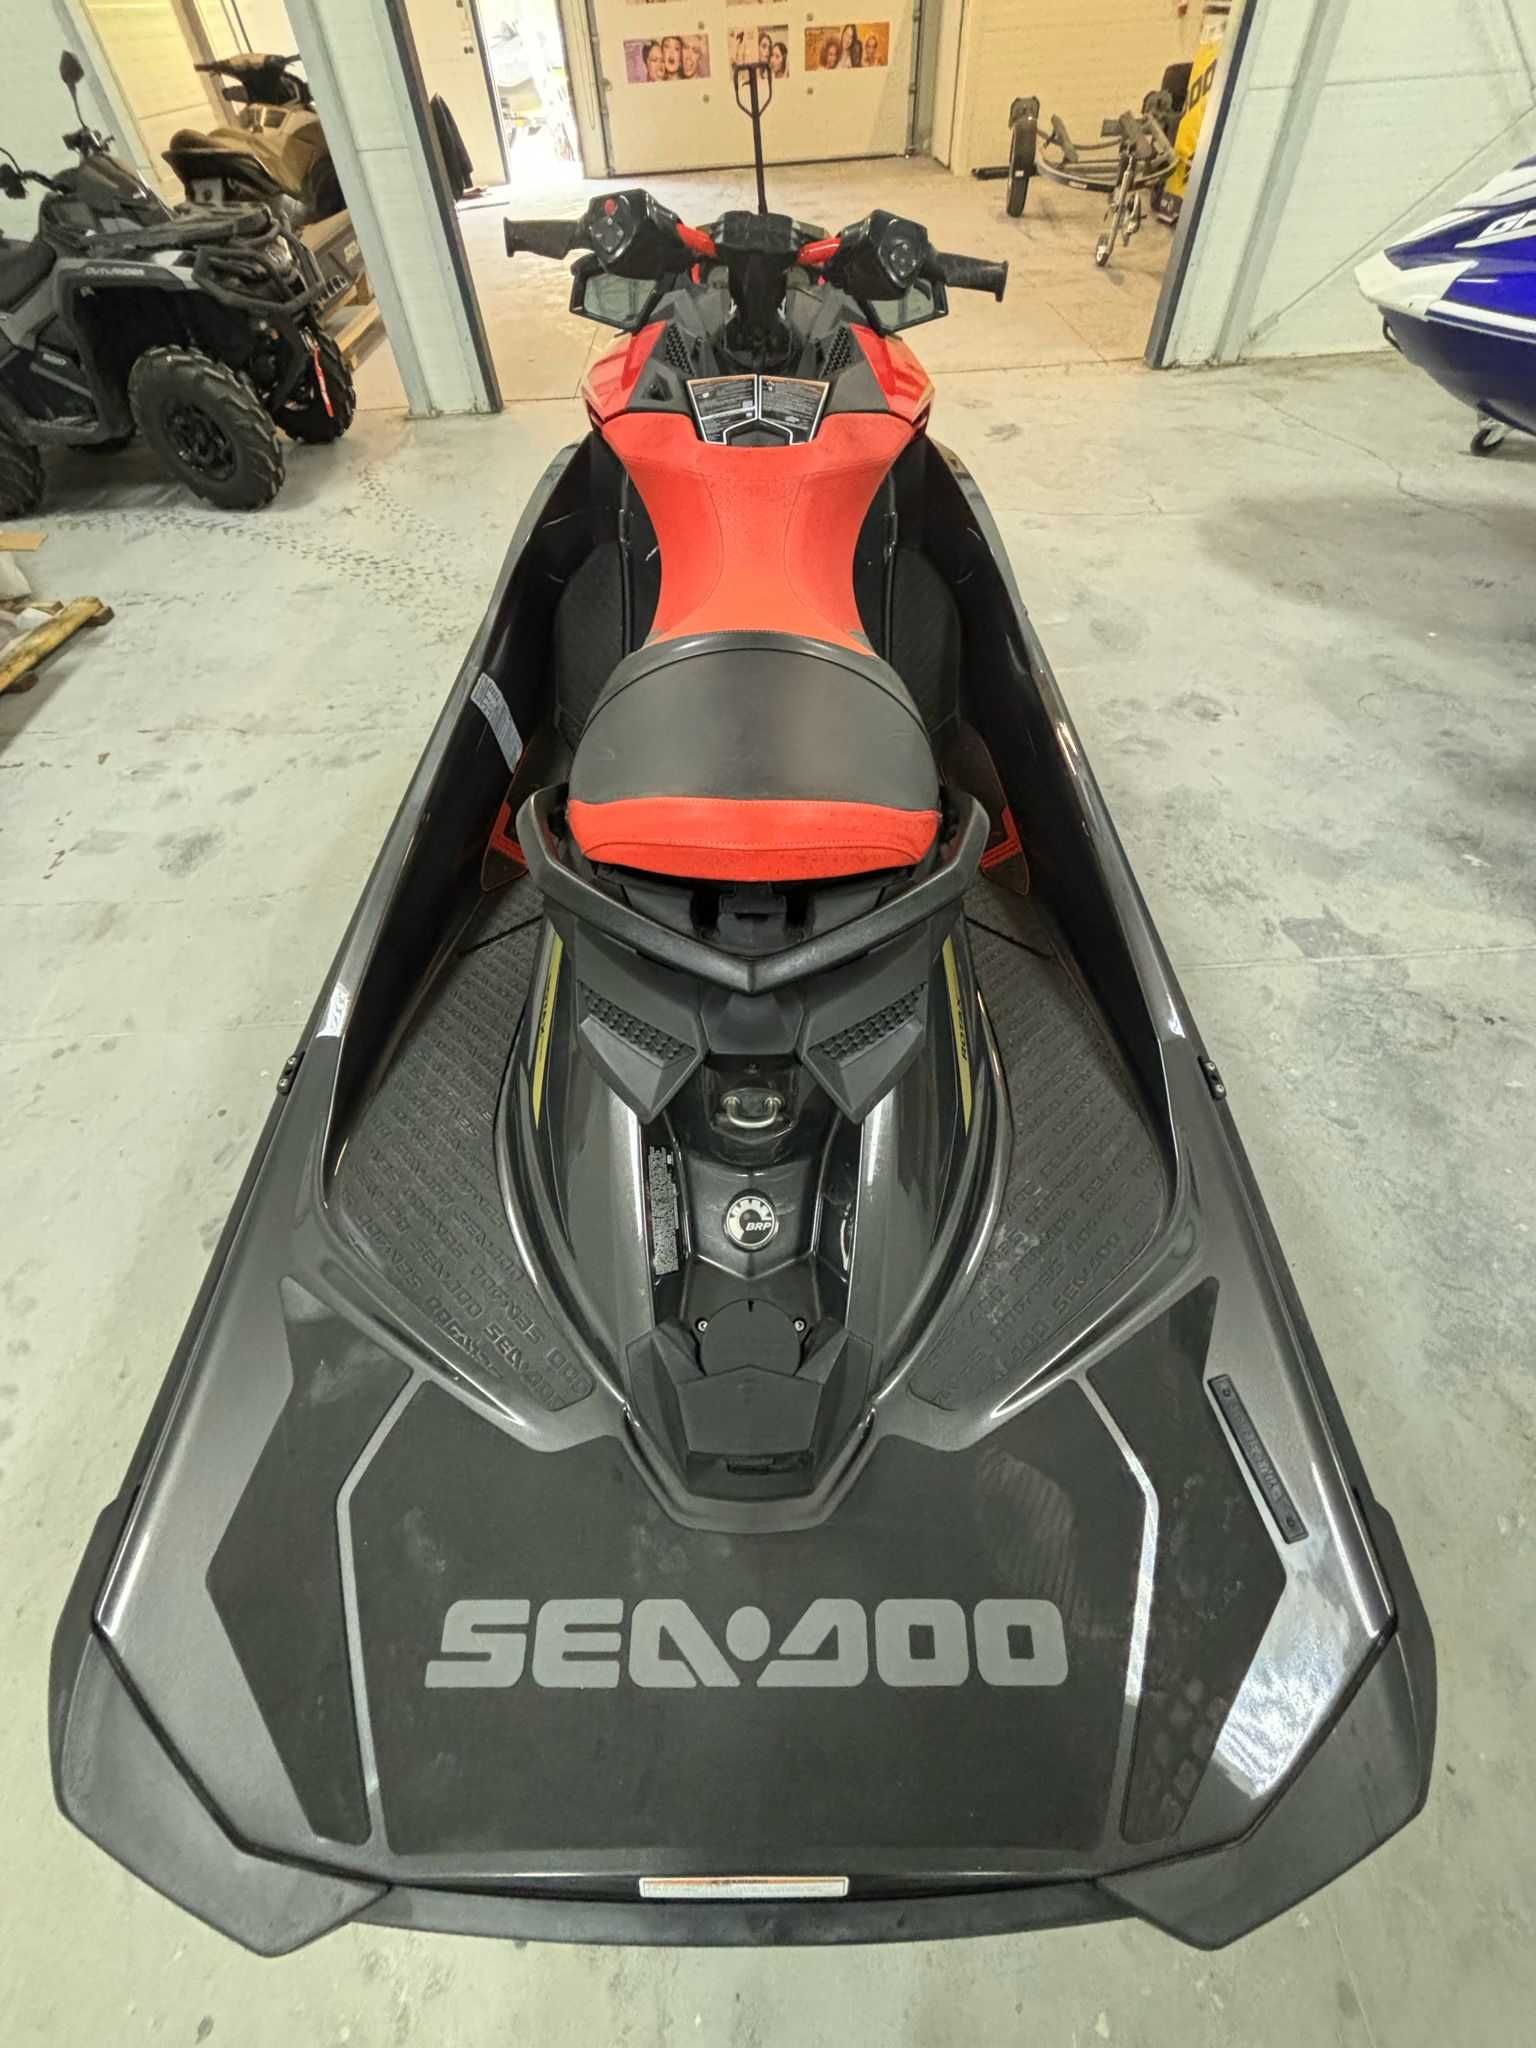 Sea Doo RXP 300 RS 2019r, 75mth, skuter wodny